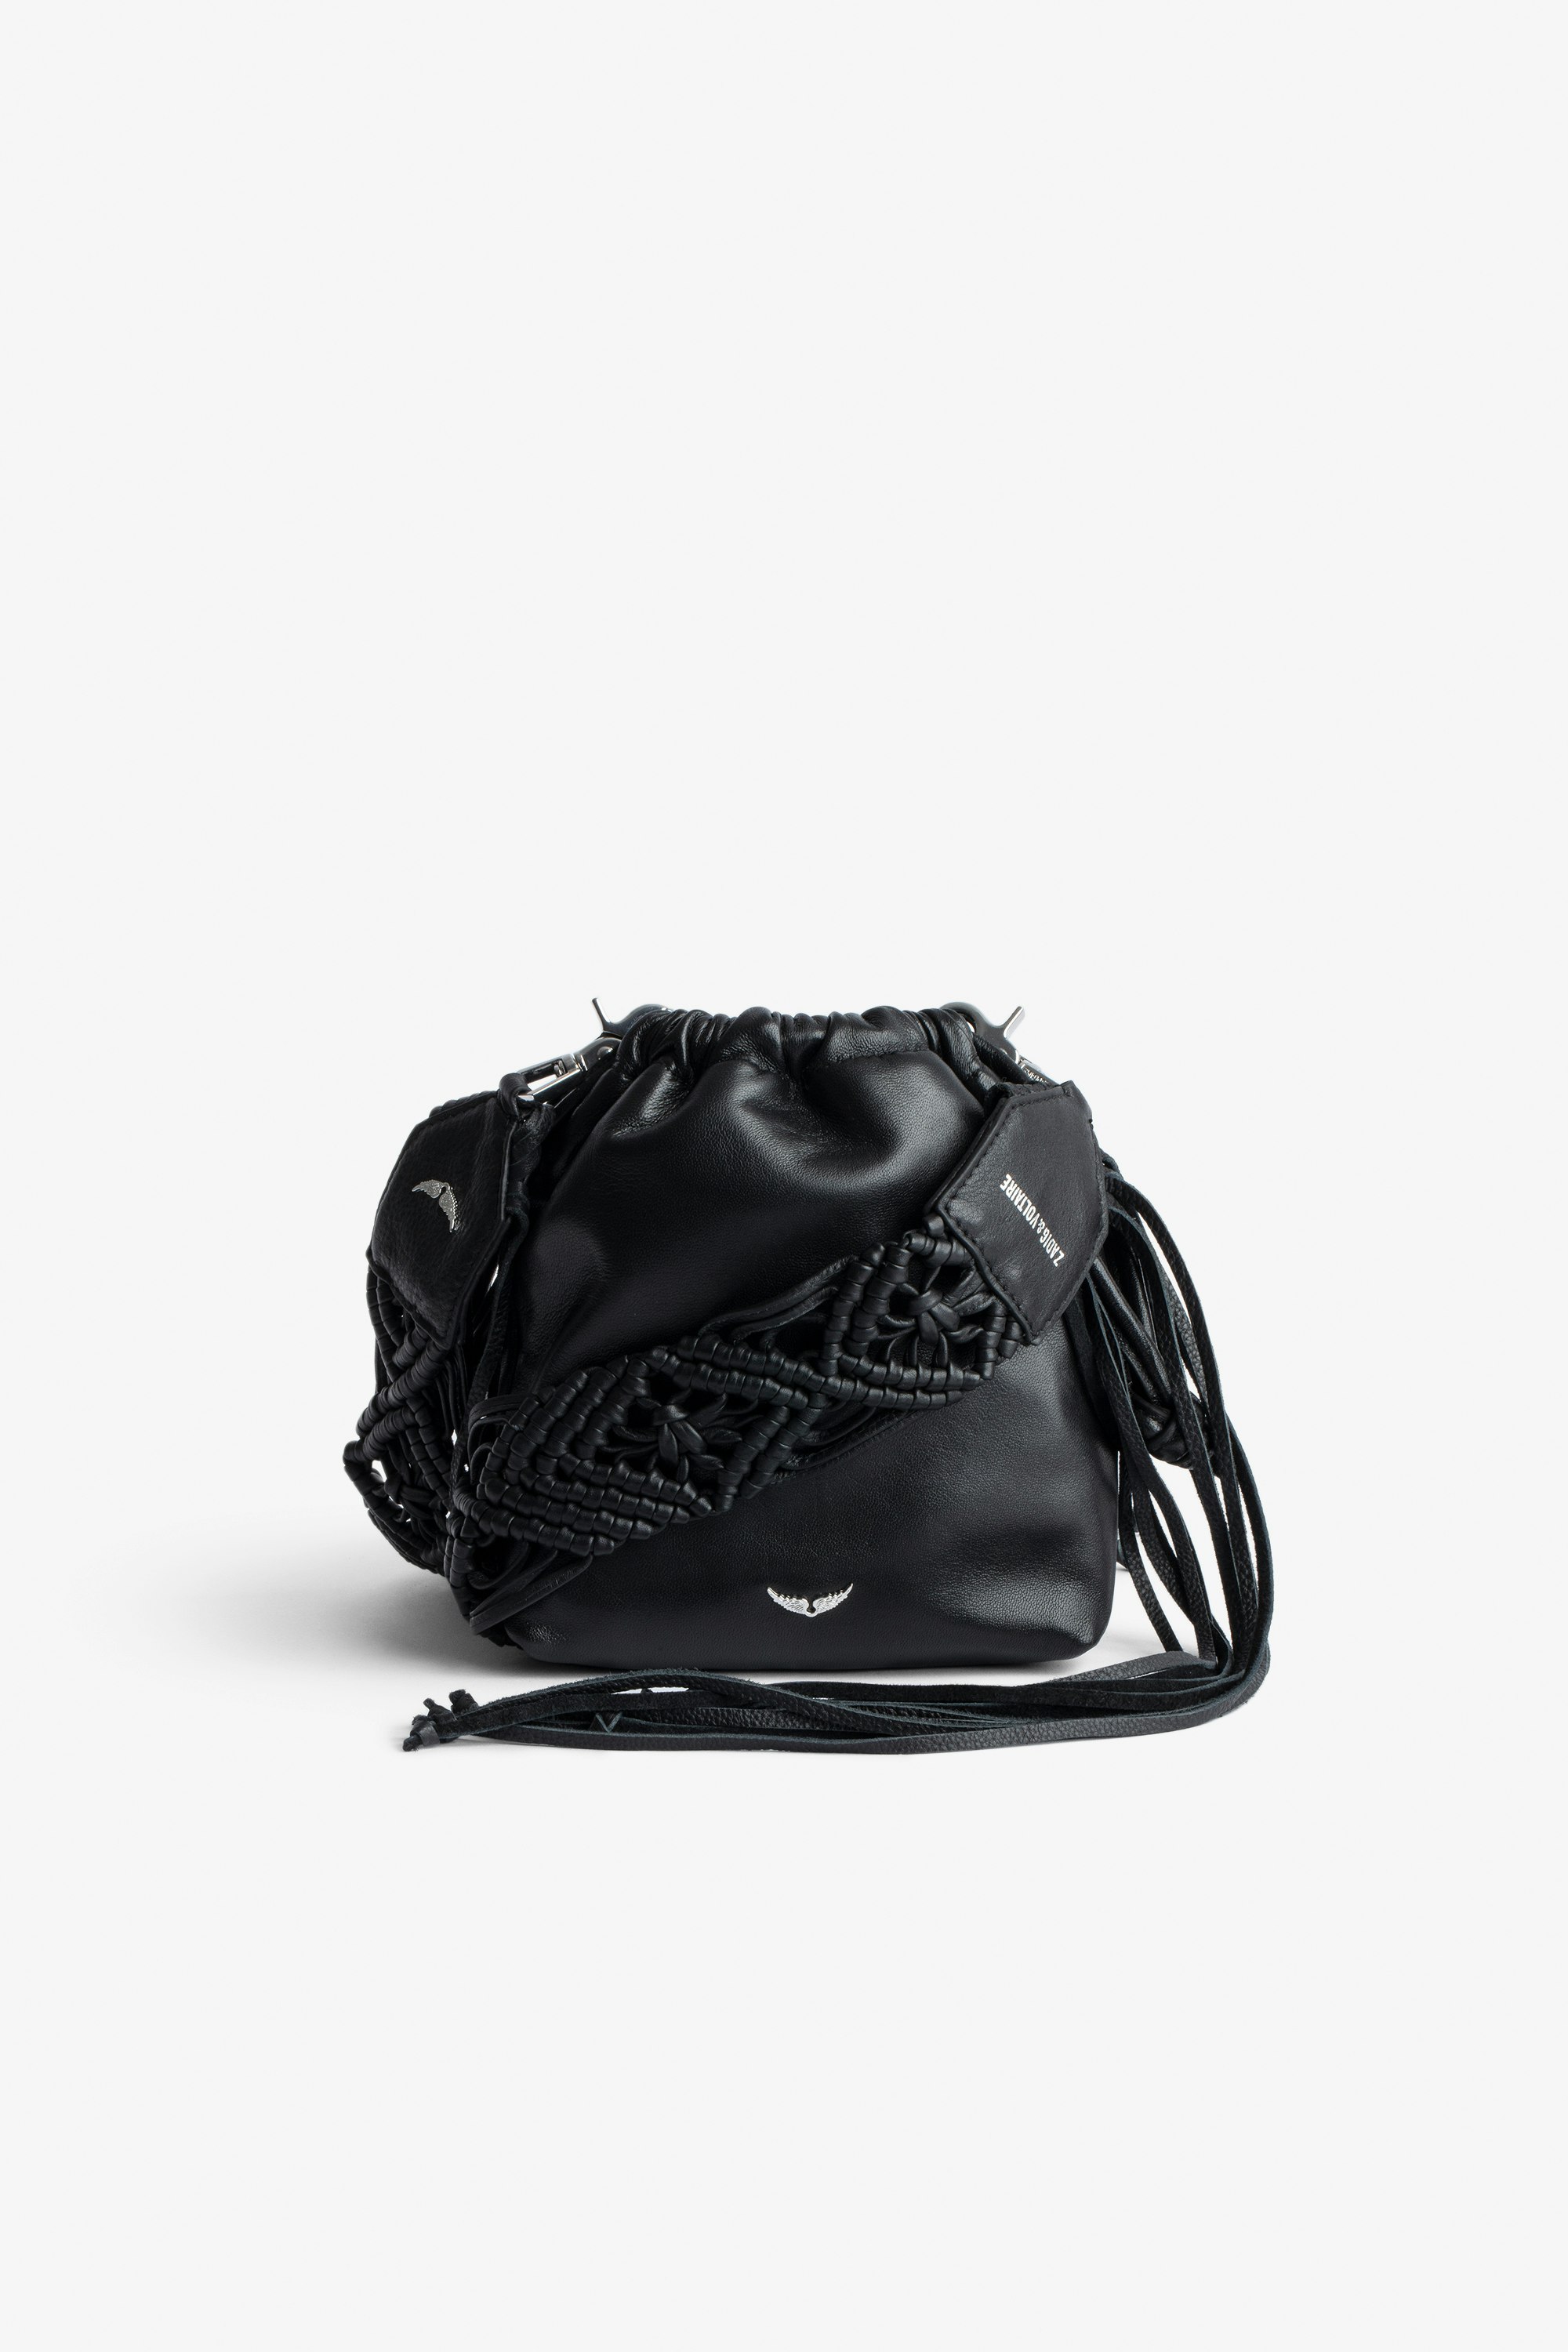 Rock To Go Bag Women’s bucket bag in black leather with detachable macramé shoulder strap with fringing